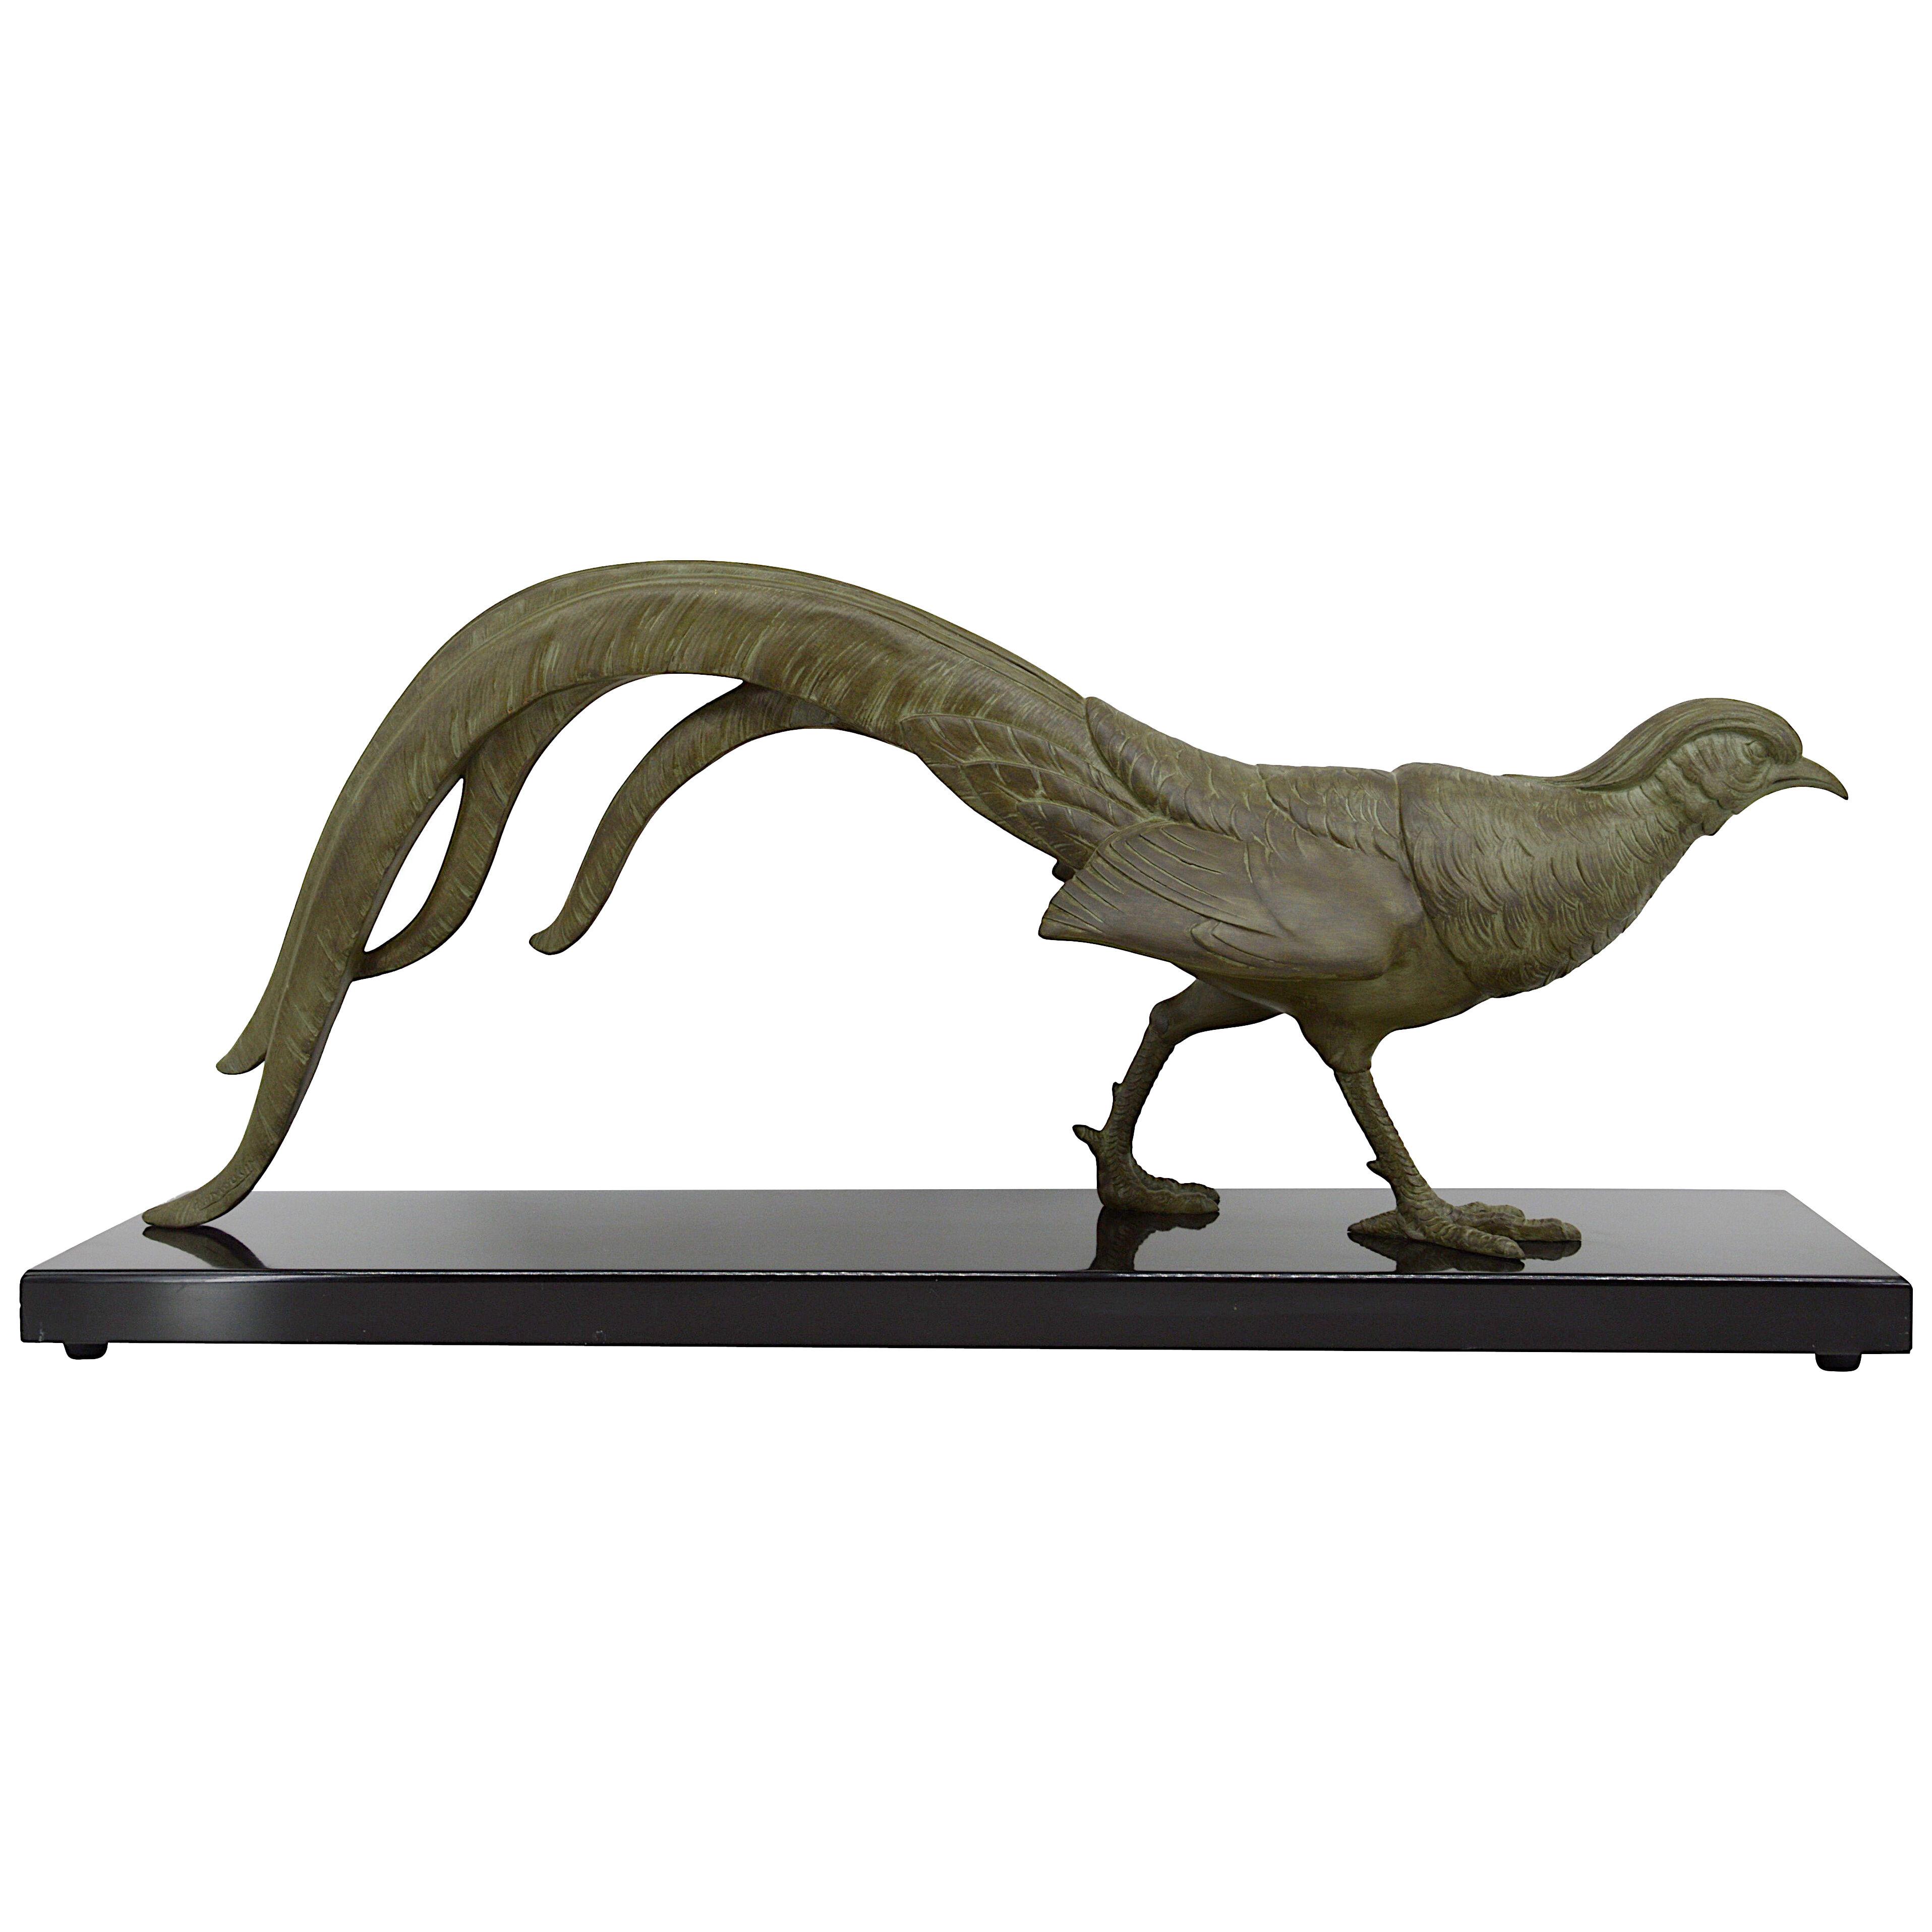 LIMOUSIN Awesome Large French Art Deco Pheasant sculpture 1930